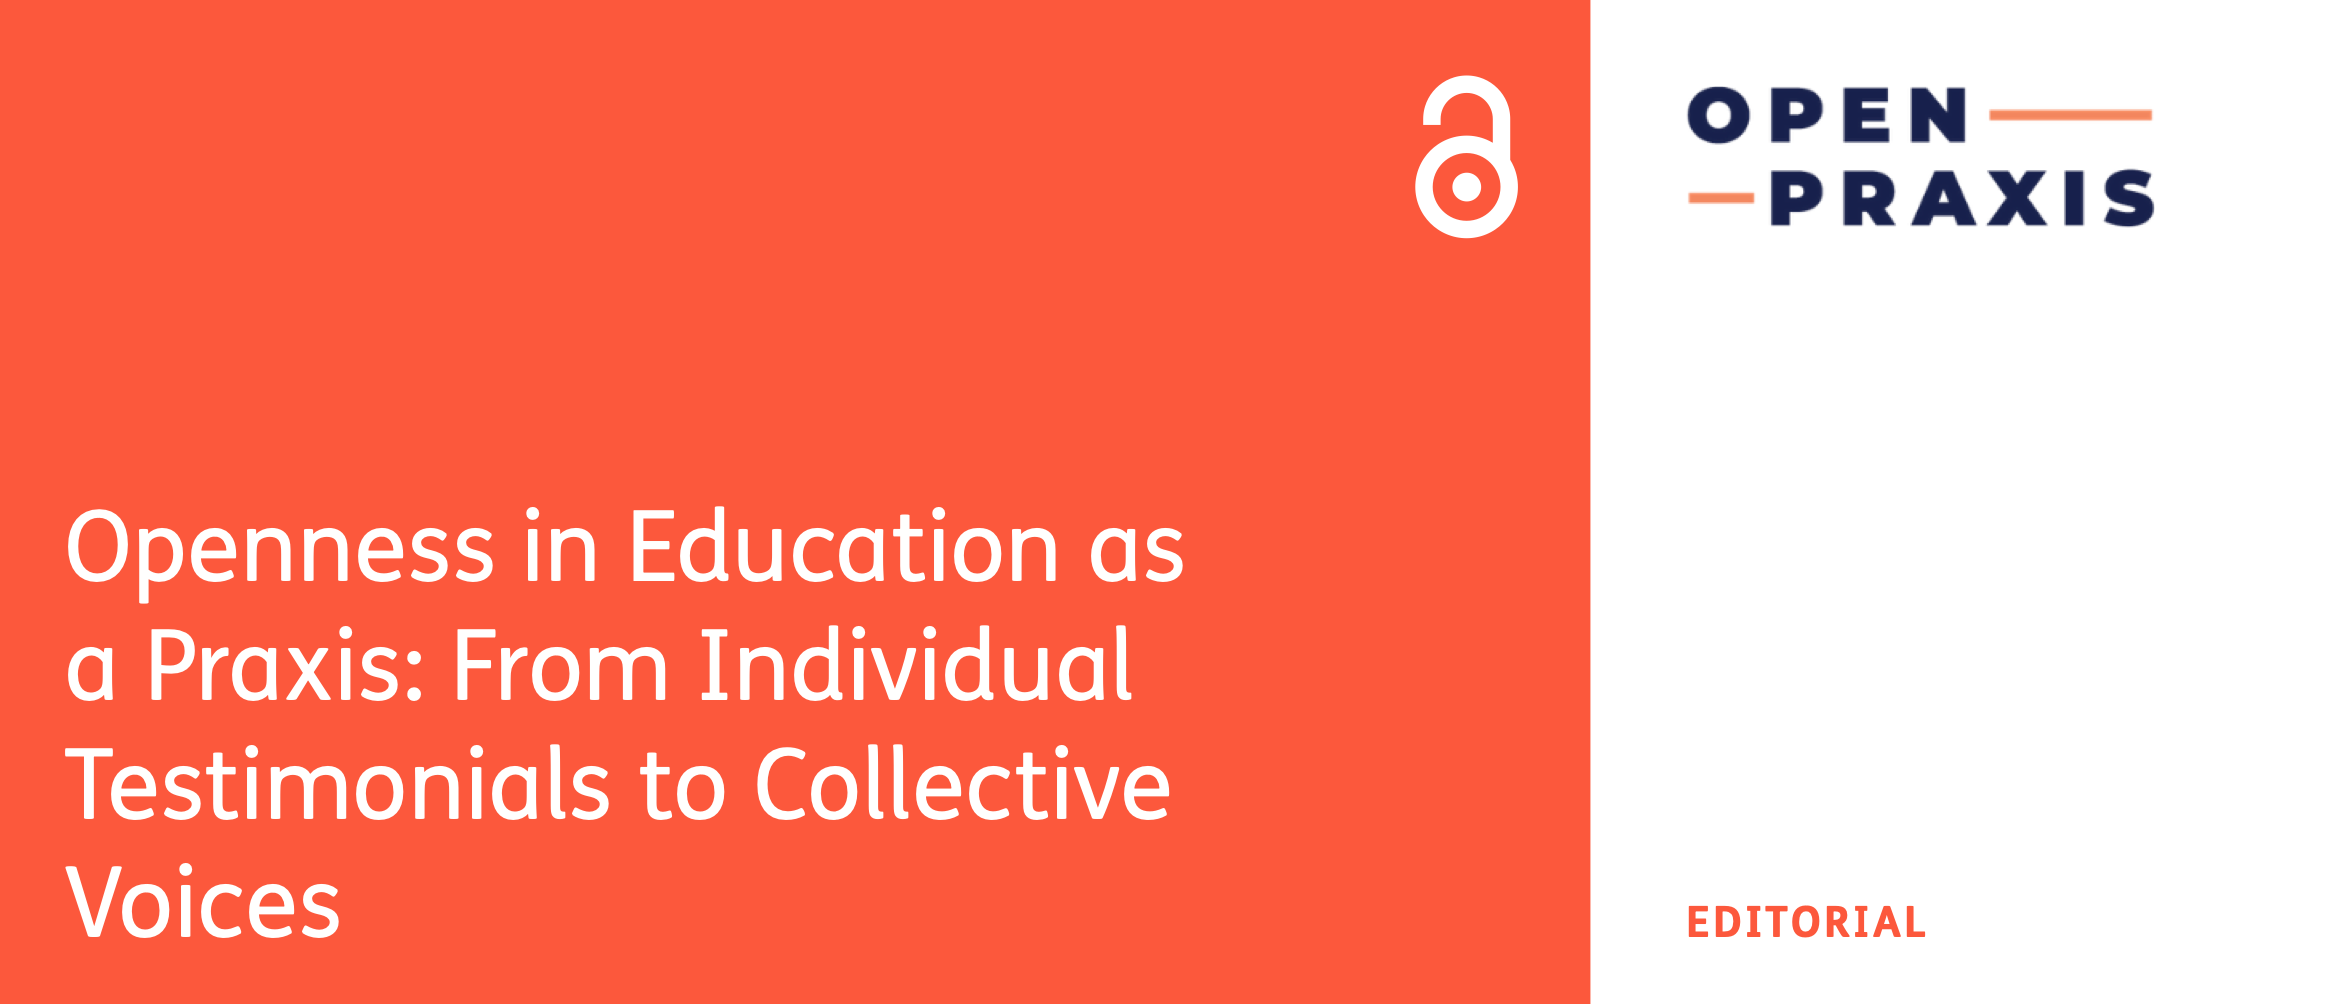 Openness in Education as a Praxis: From Individual Testimonials to Collective Voices